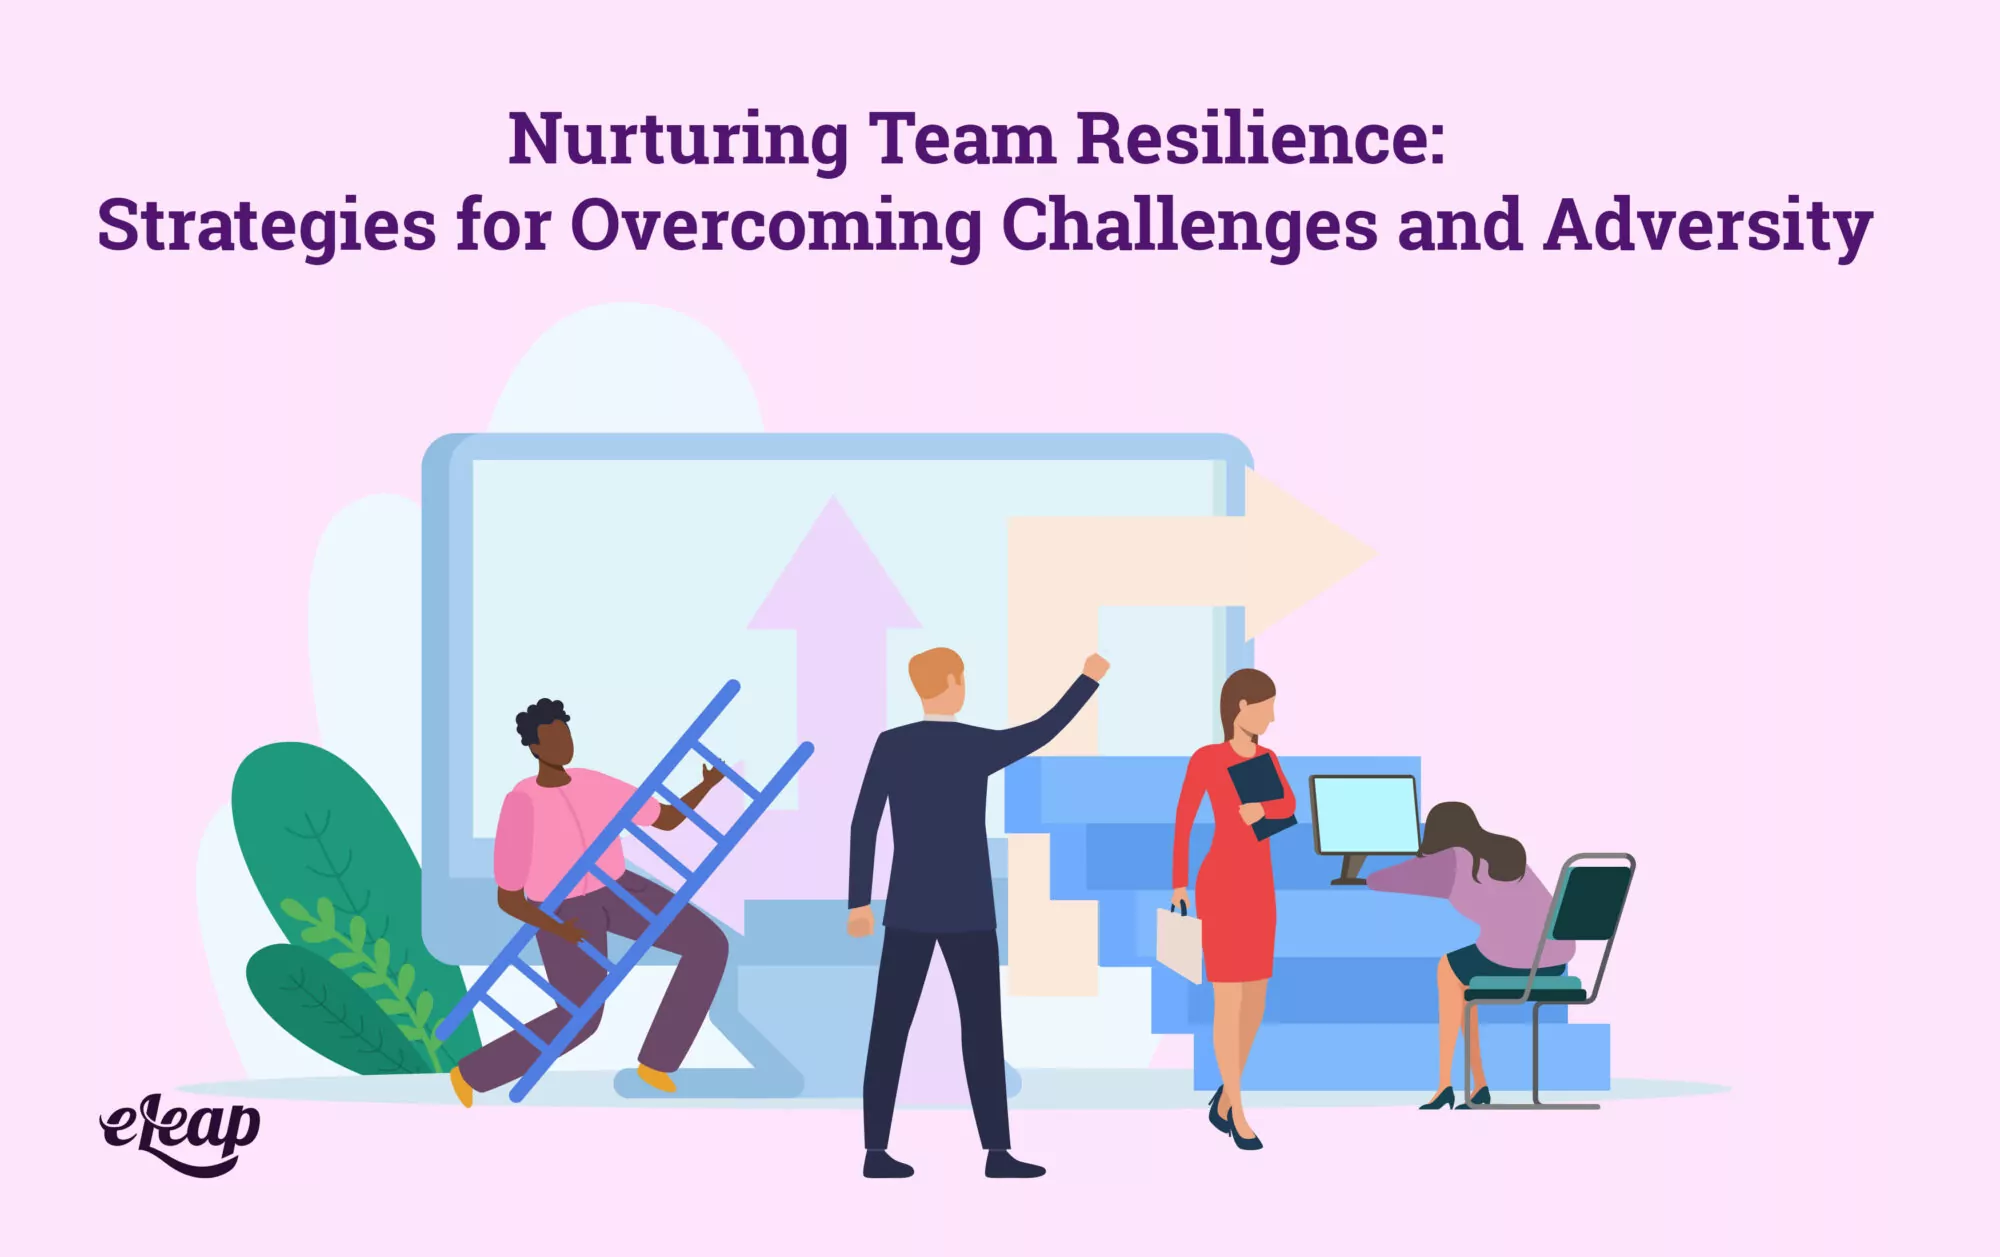 Nurturing Team Resilience: Strategies for Overcoming Challenges and Adversity